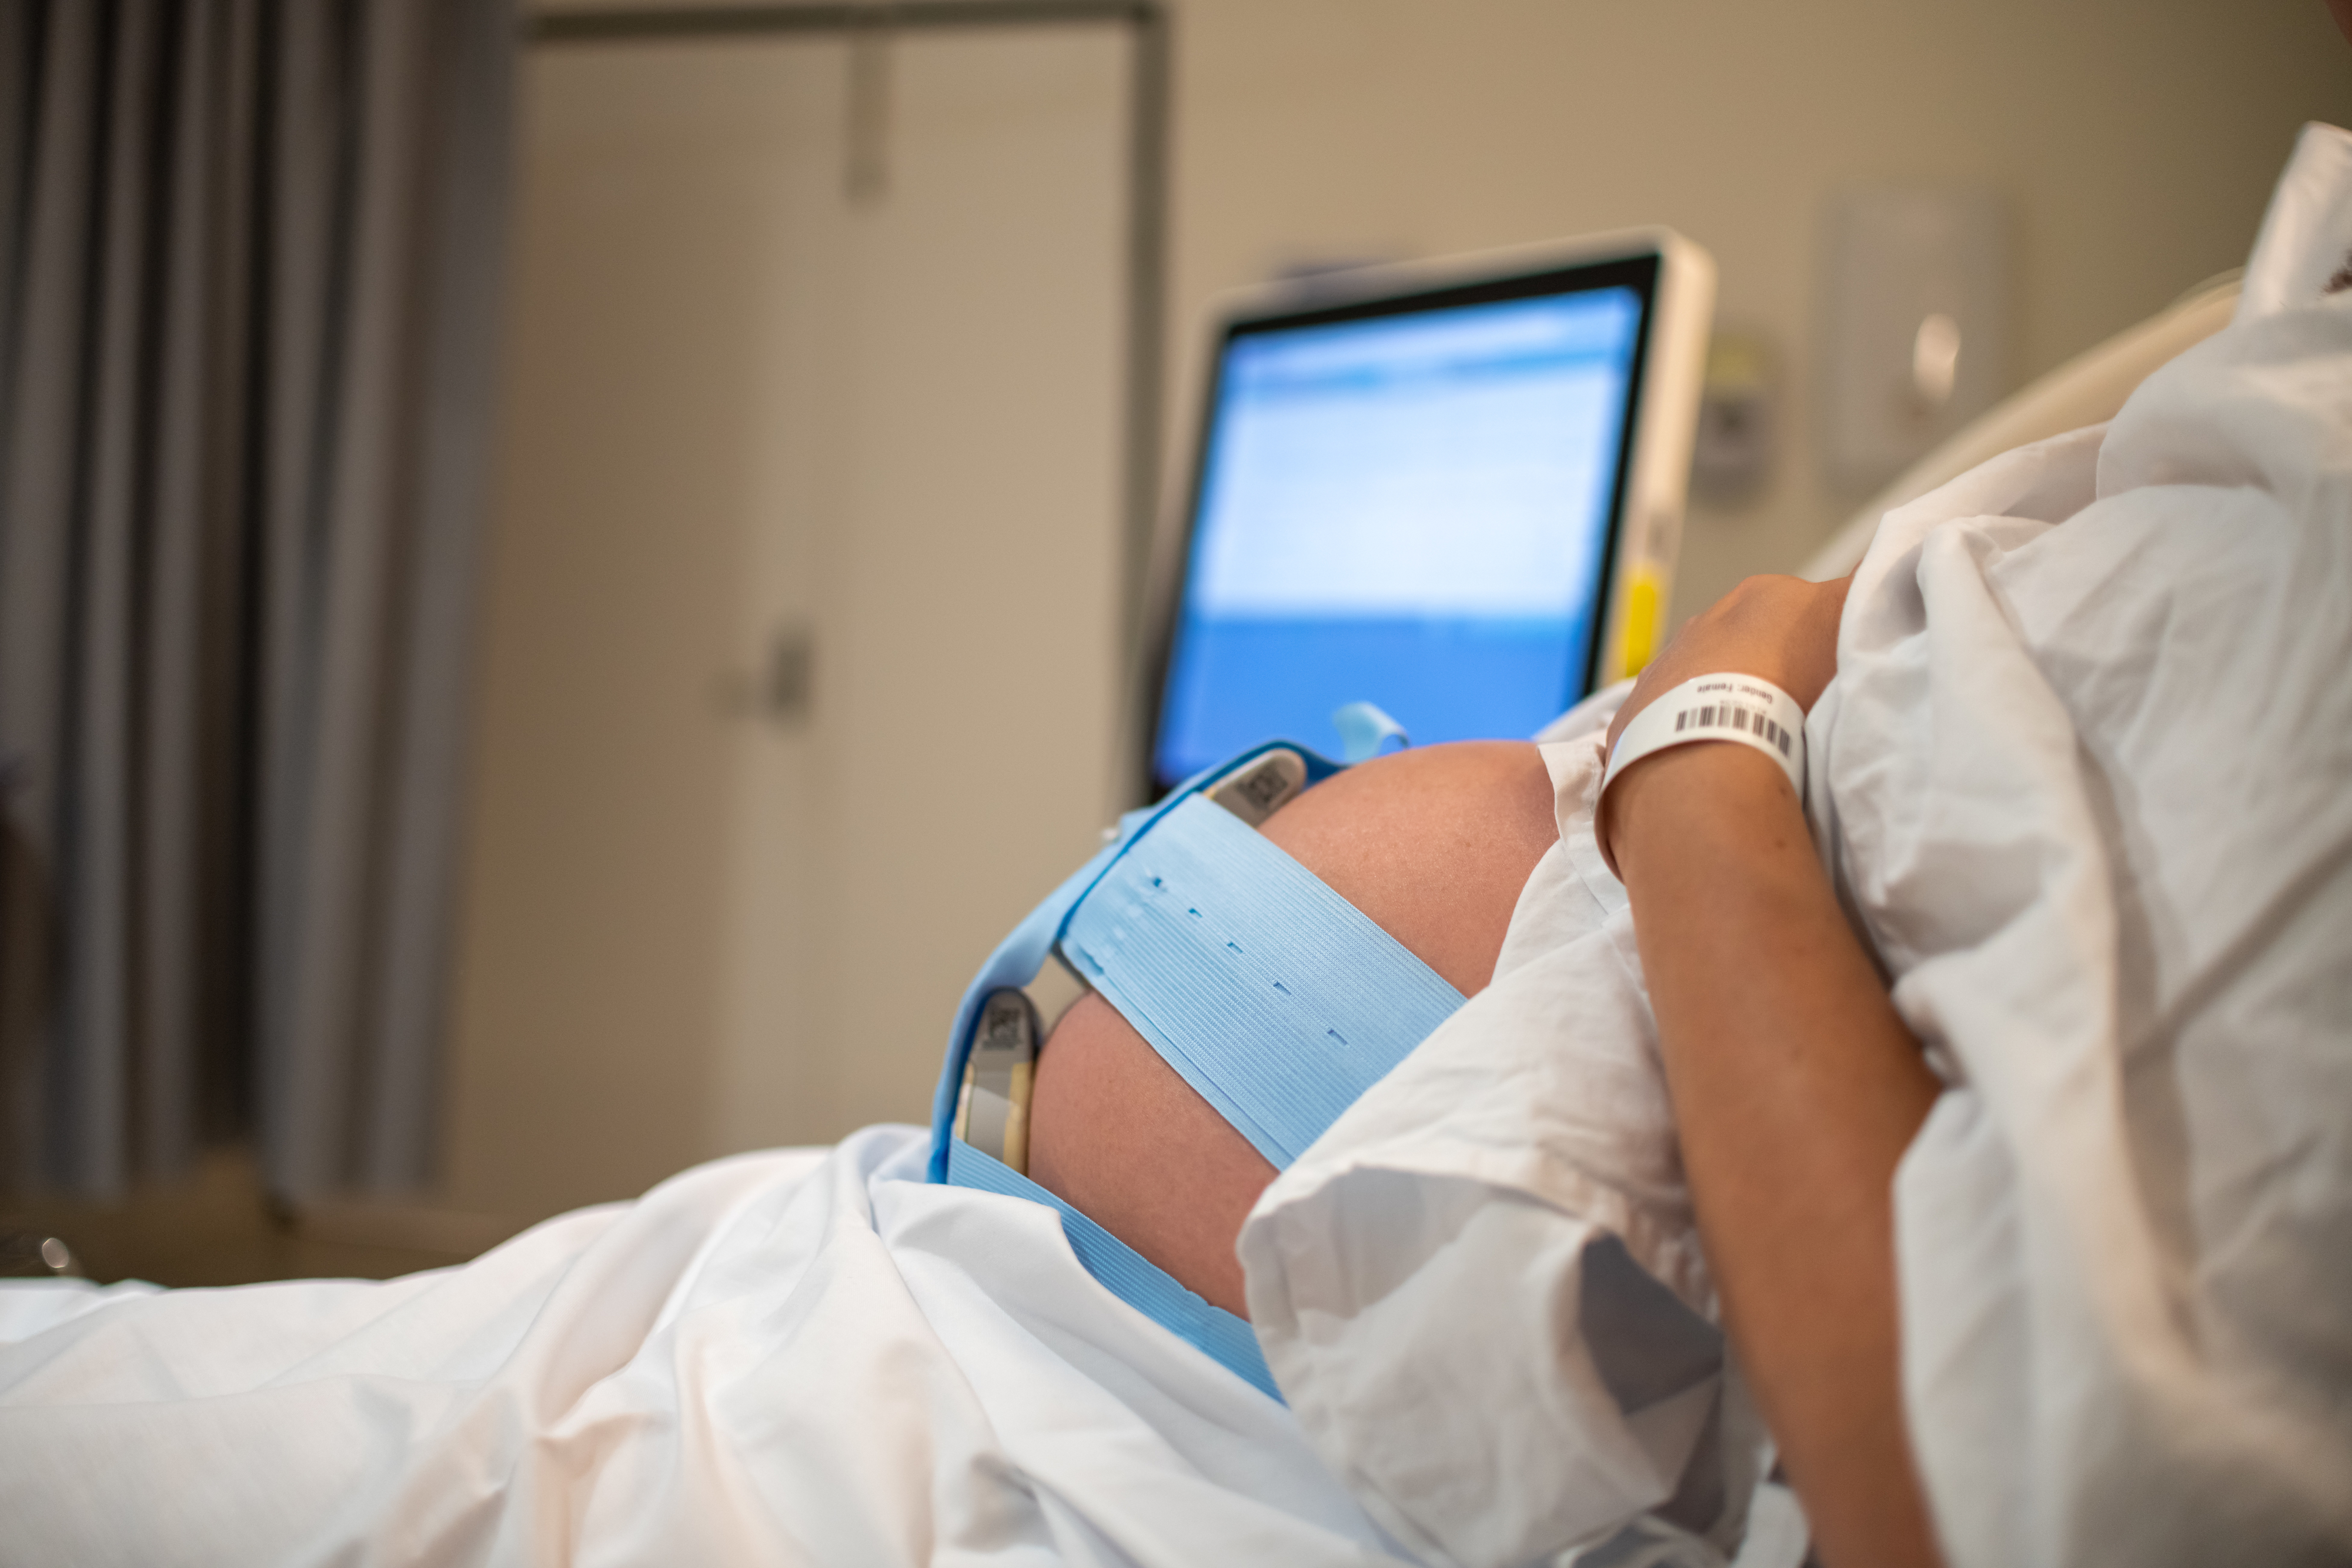 Pregnant person in hospital bed with fetal monitoring bands, monitor in background